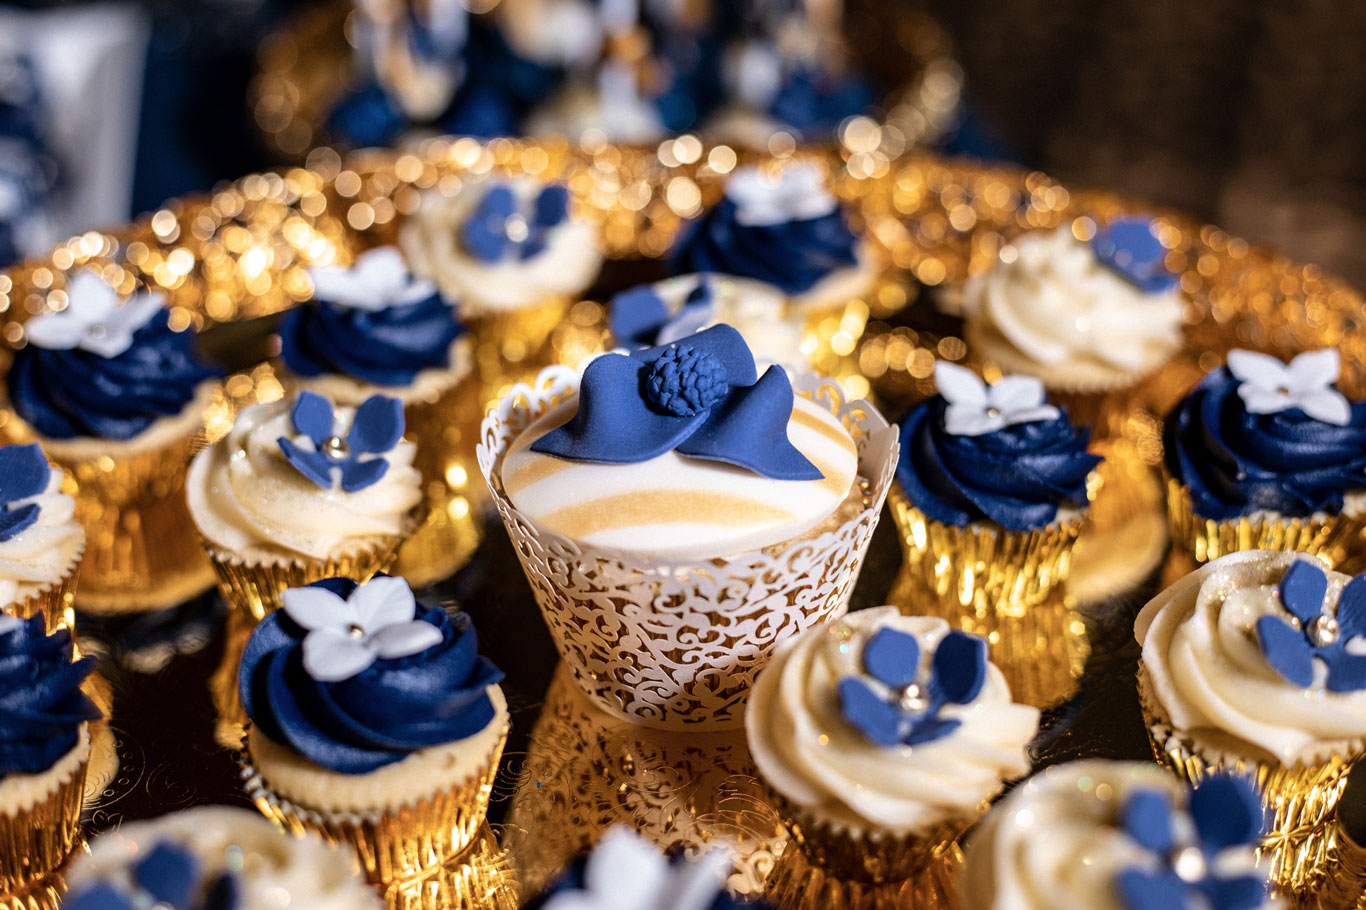 GC Couture's Luxury Cupcakes at The Berkeley Hotel, Knightsbridge